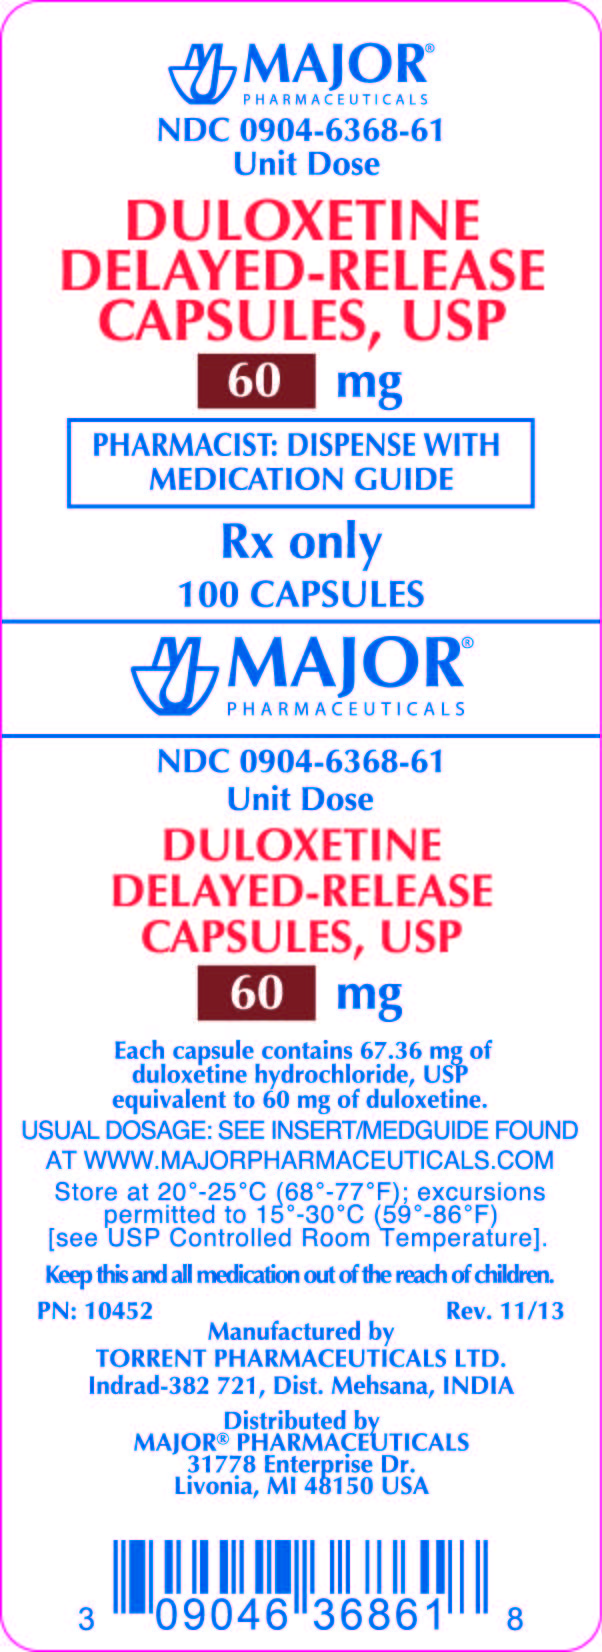 DULOXETINE DELAYED-RELEASE CAPSULES, USP 60MG